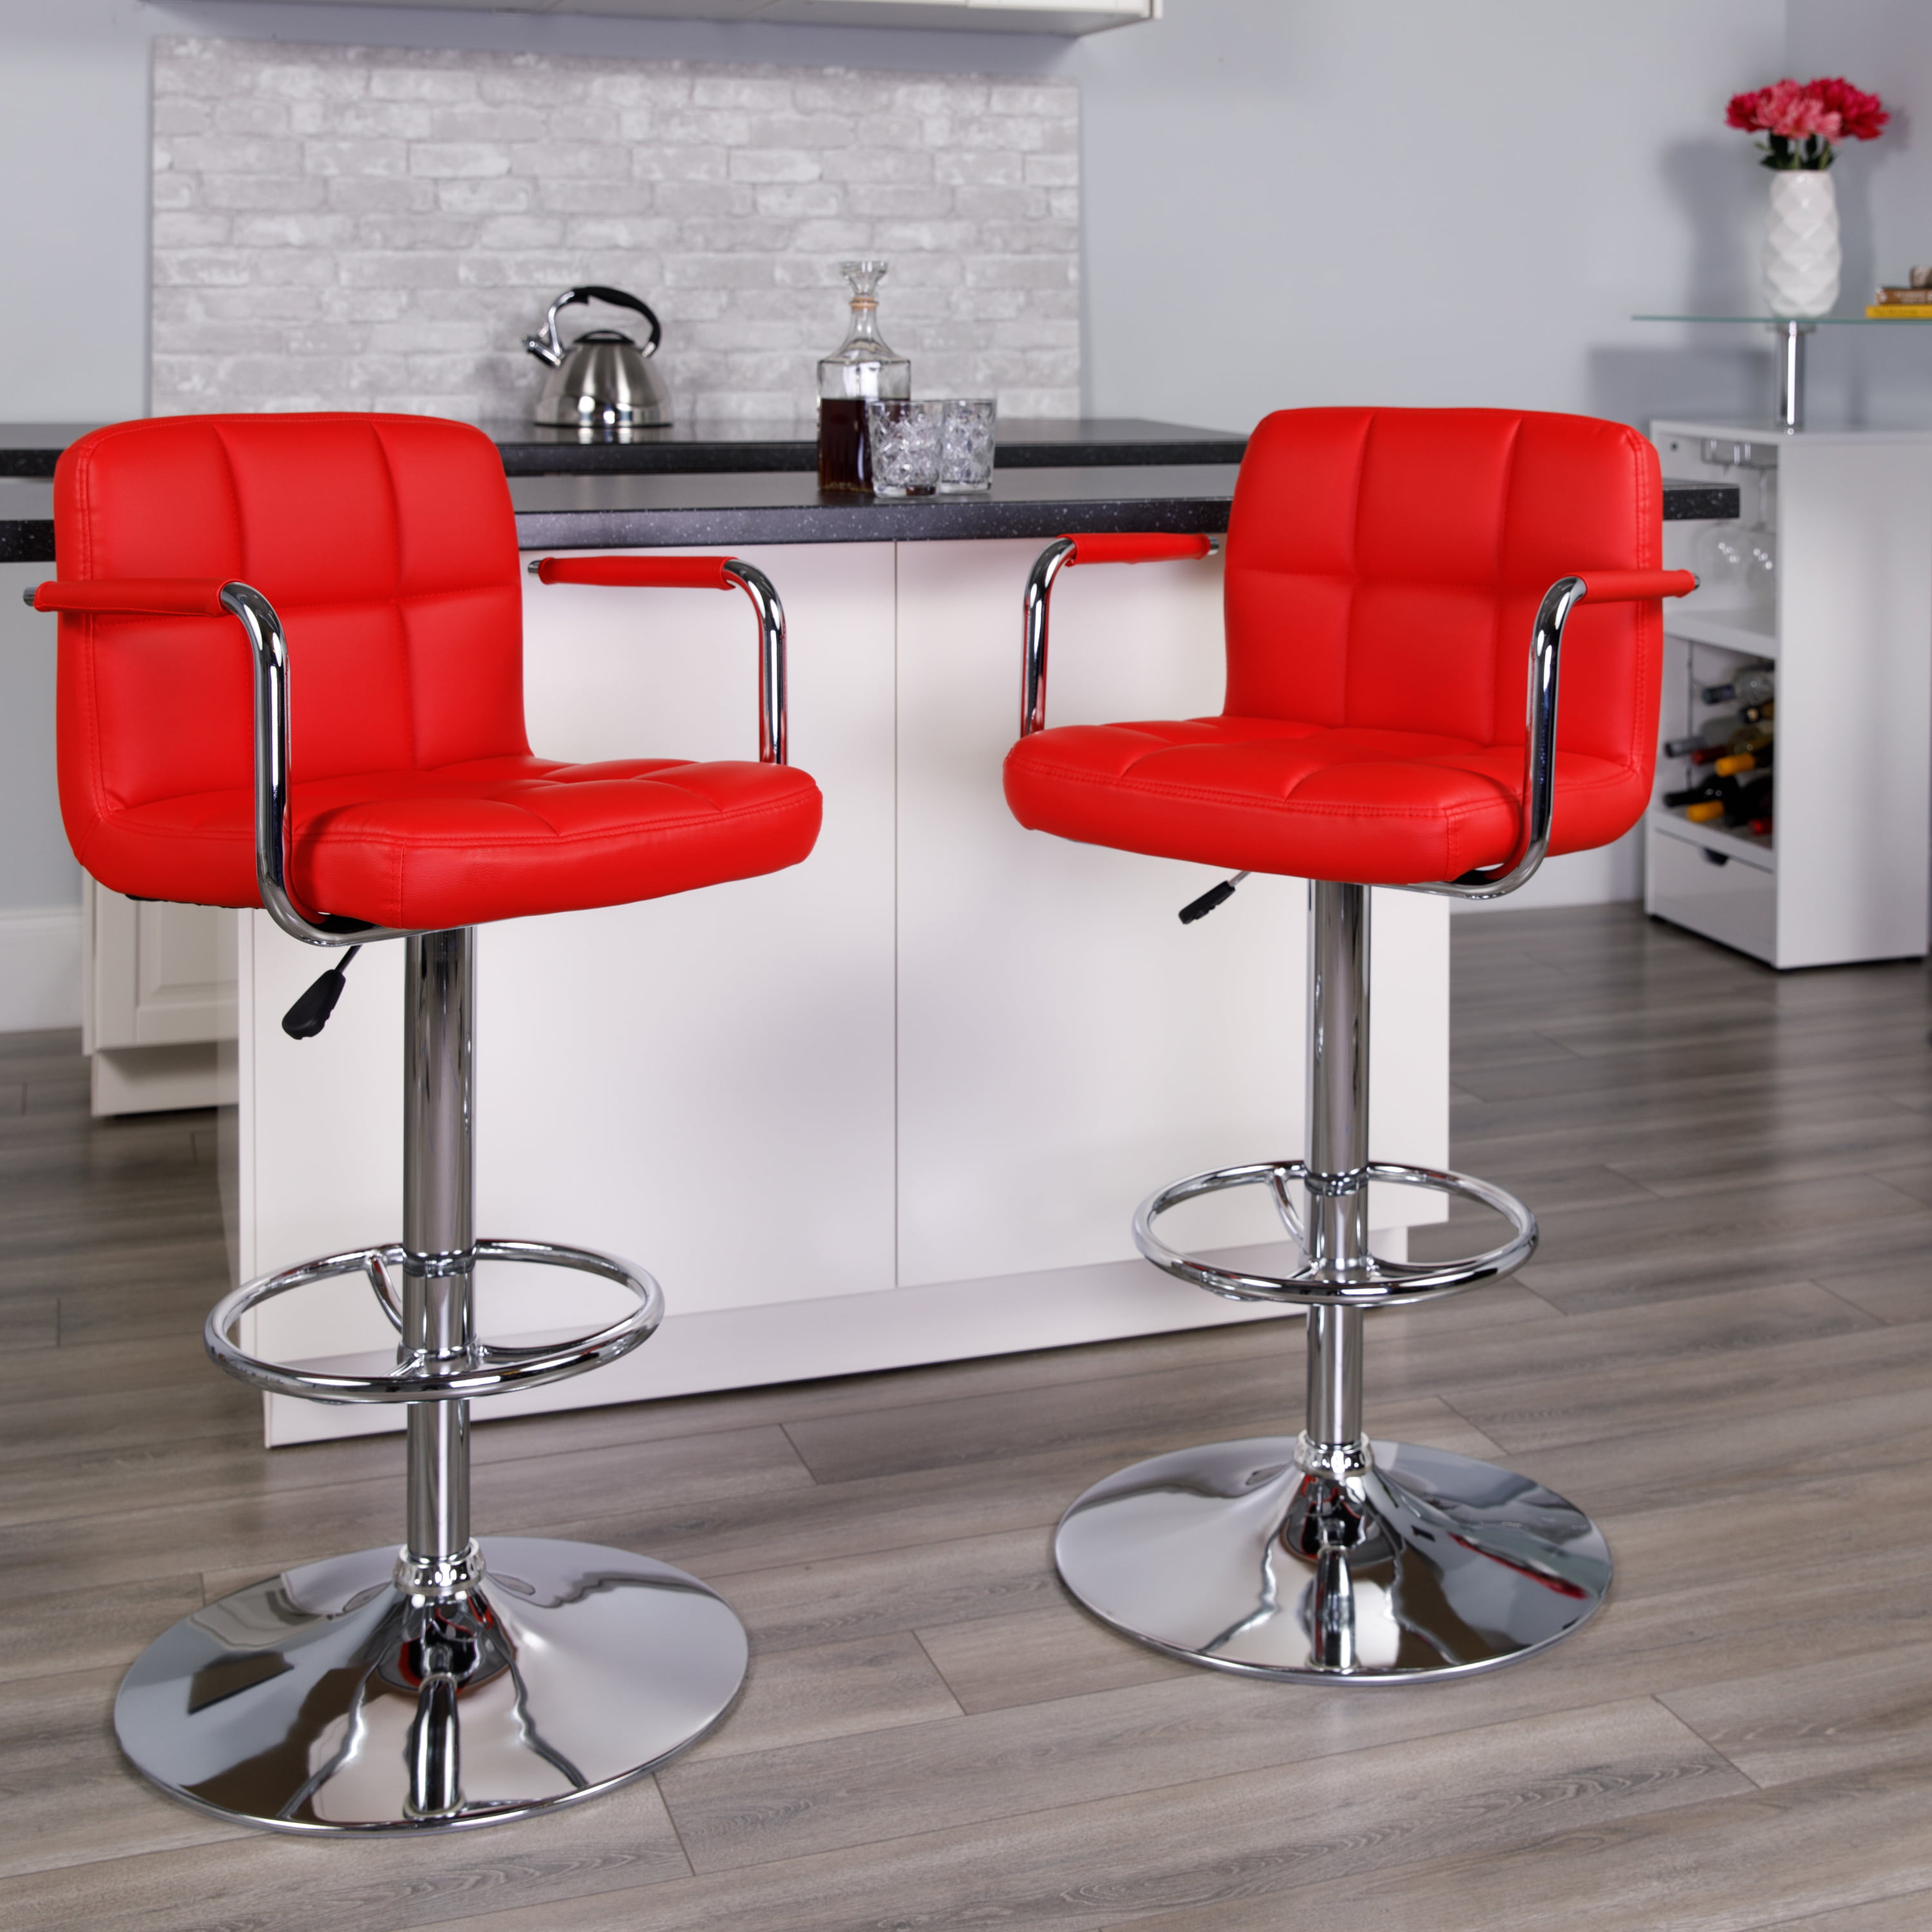 Black Quilted Vinyl Adjustable Height Bar Stool with Arms & Chrome Base 